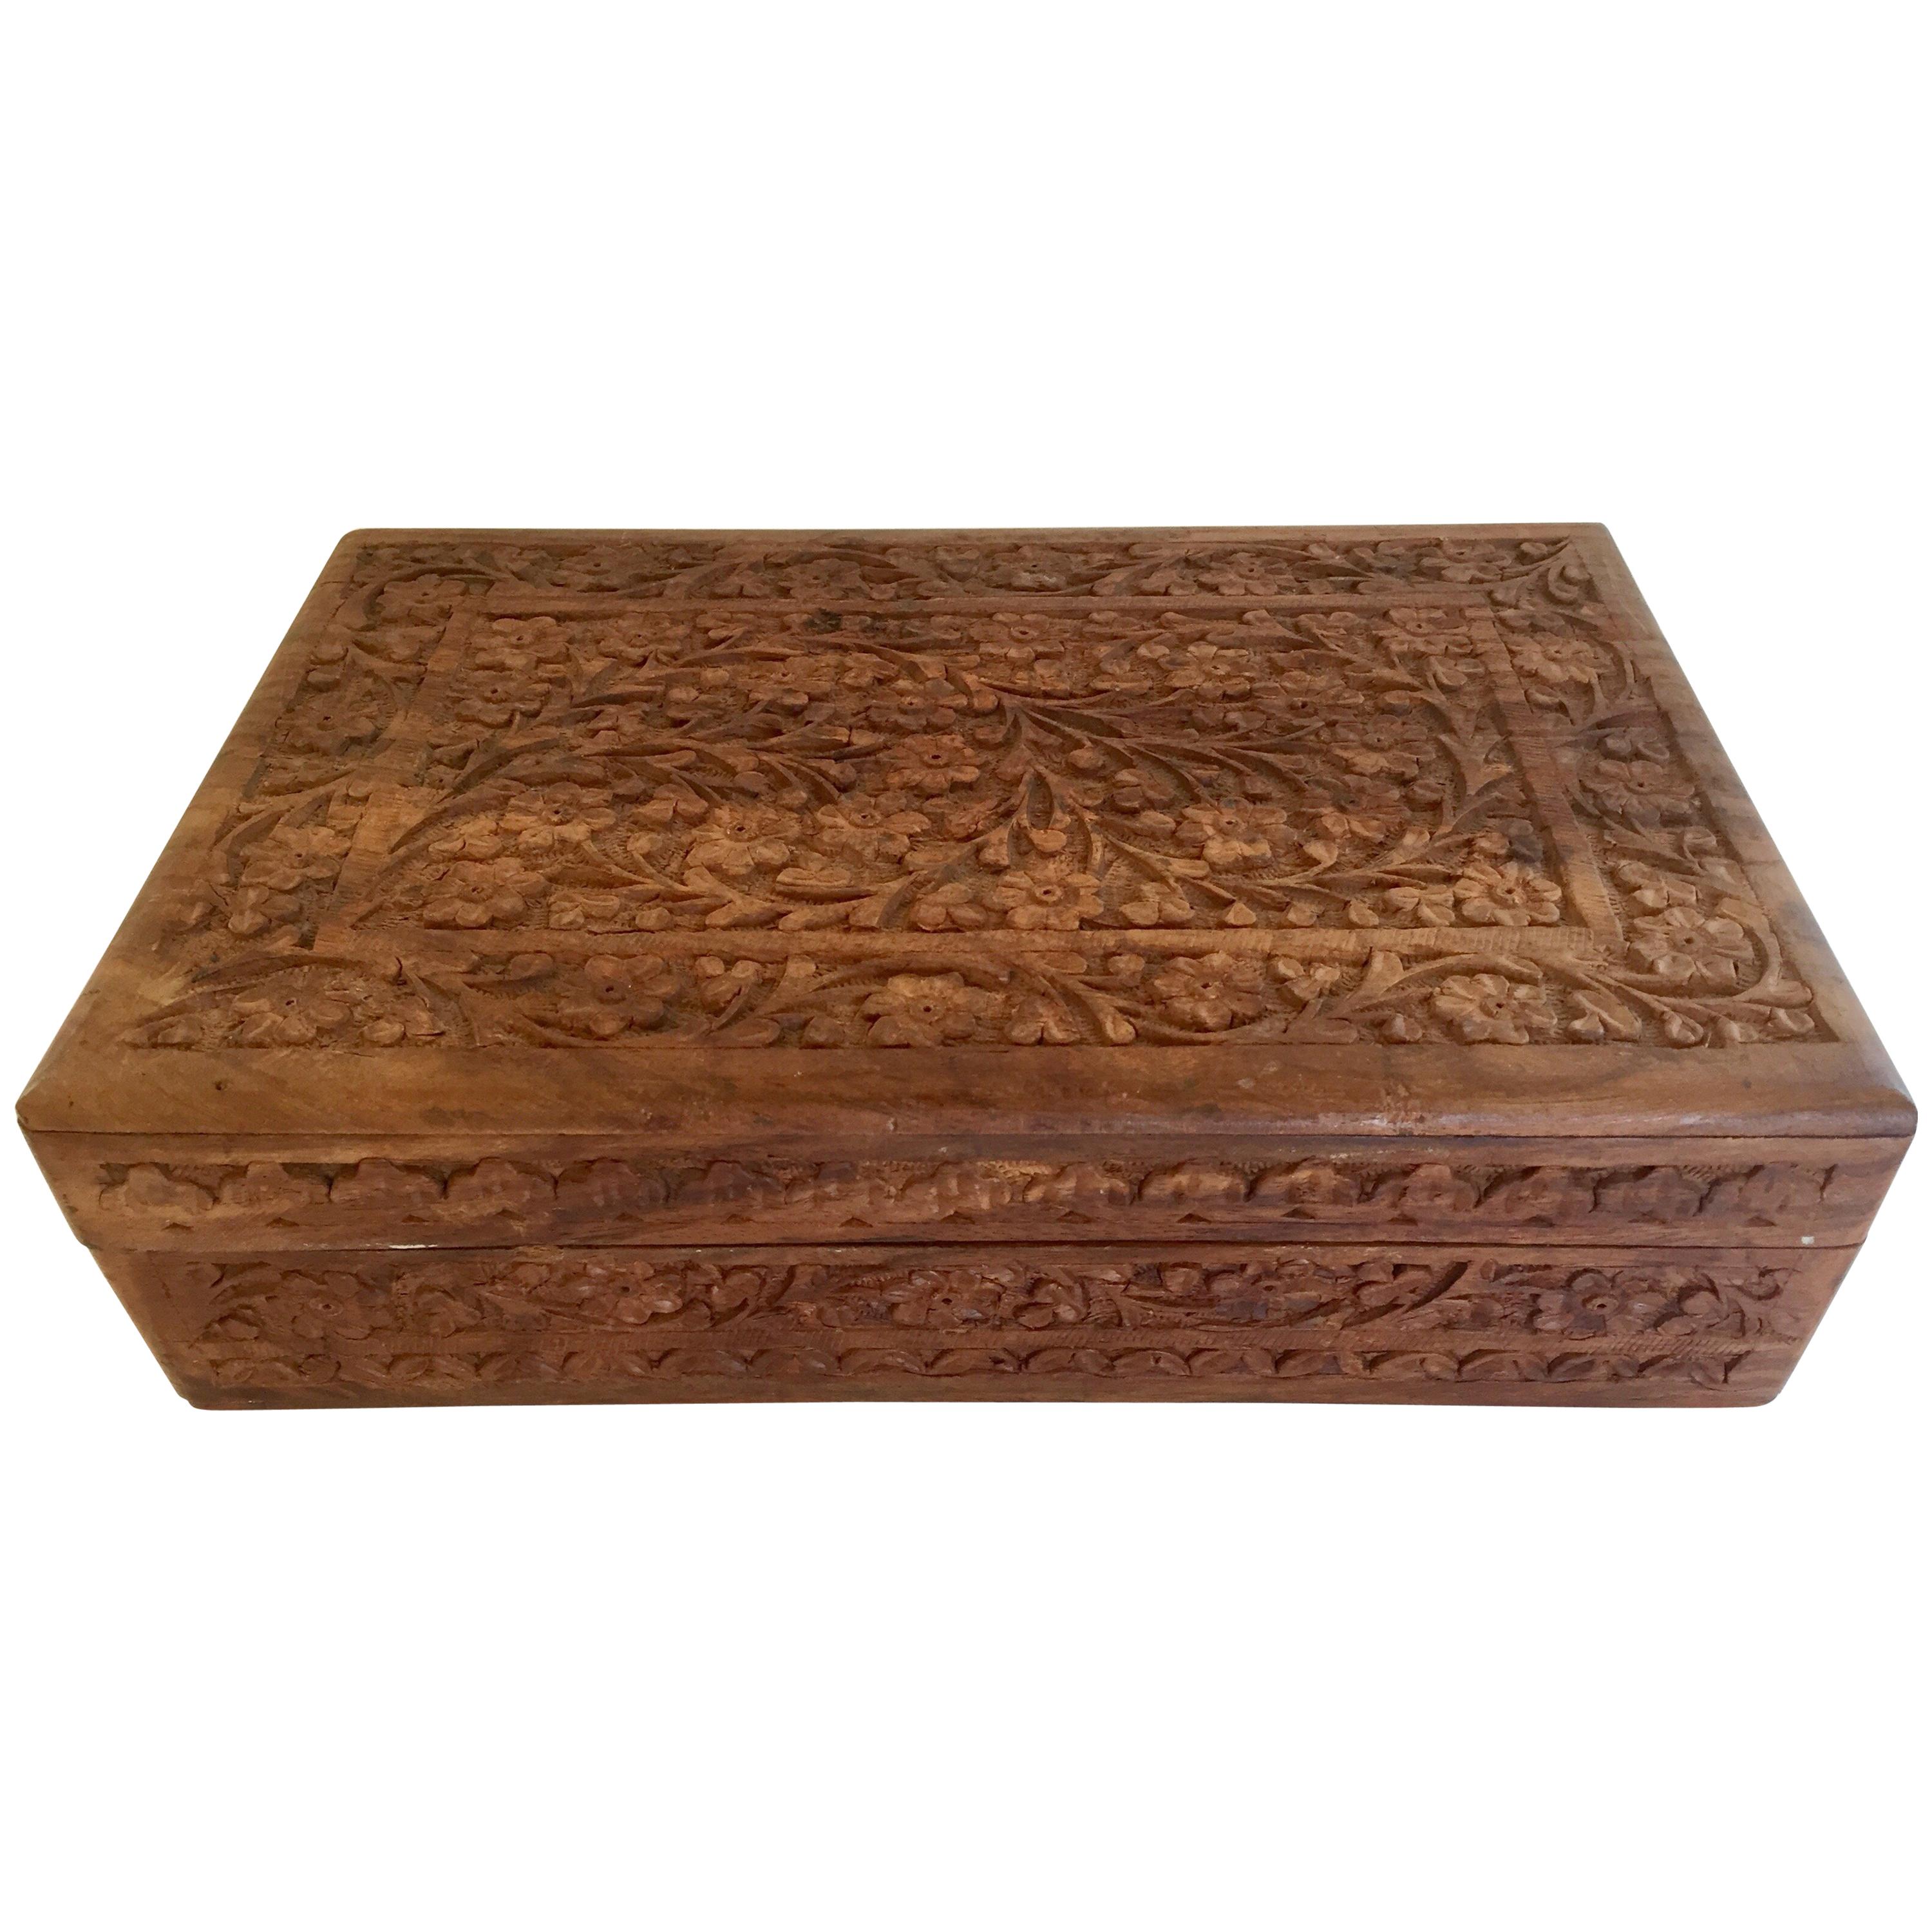 Anglo Raj Hand-Carved Wooden Decorative Jewelry Box